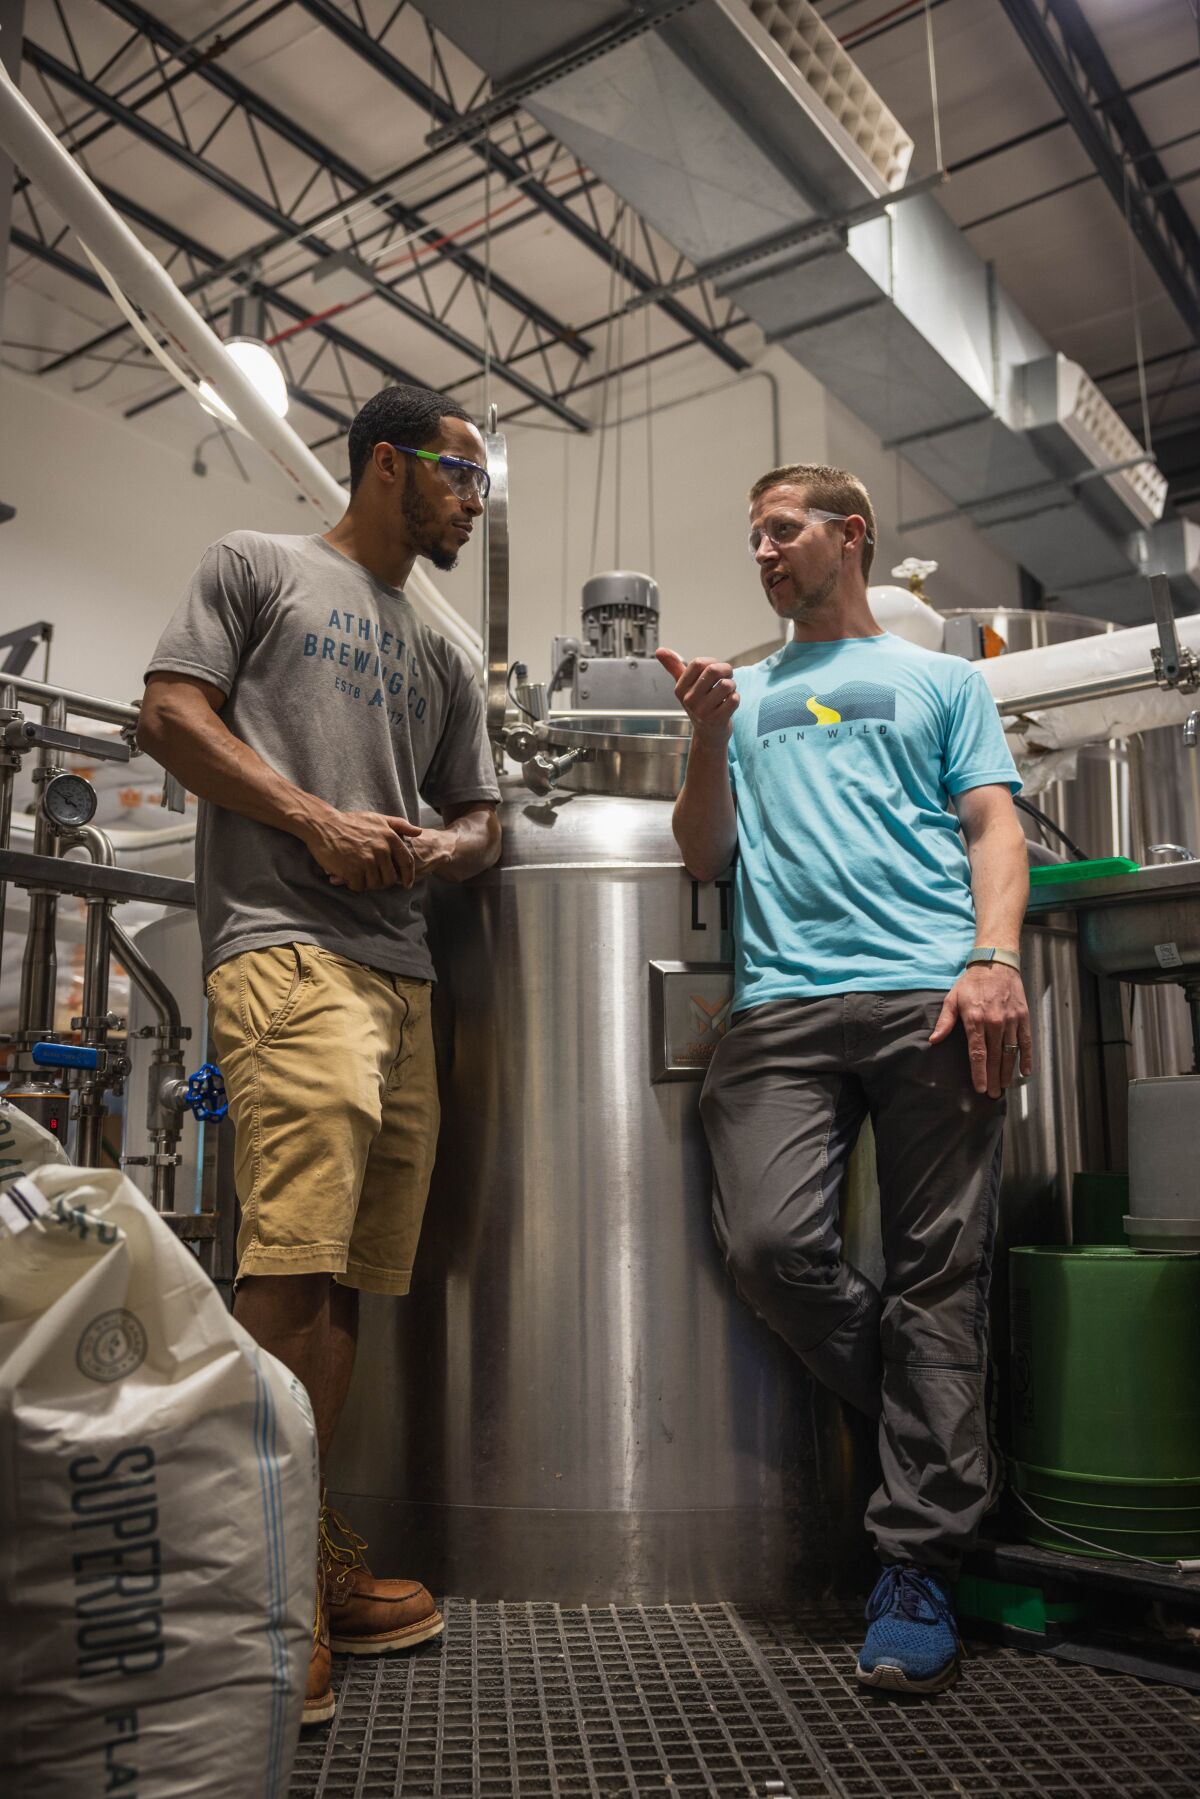 Athletic Brewing Company's 2021 scholarship winner Oren Ferris, left, with Athletic's co-founder and head brewer John Walker.